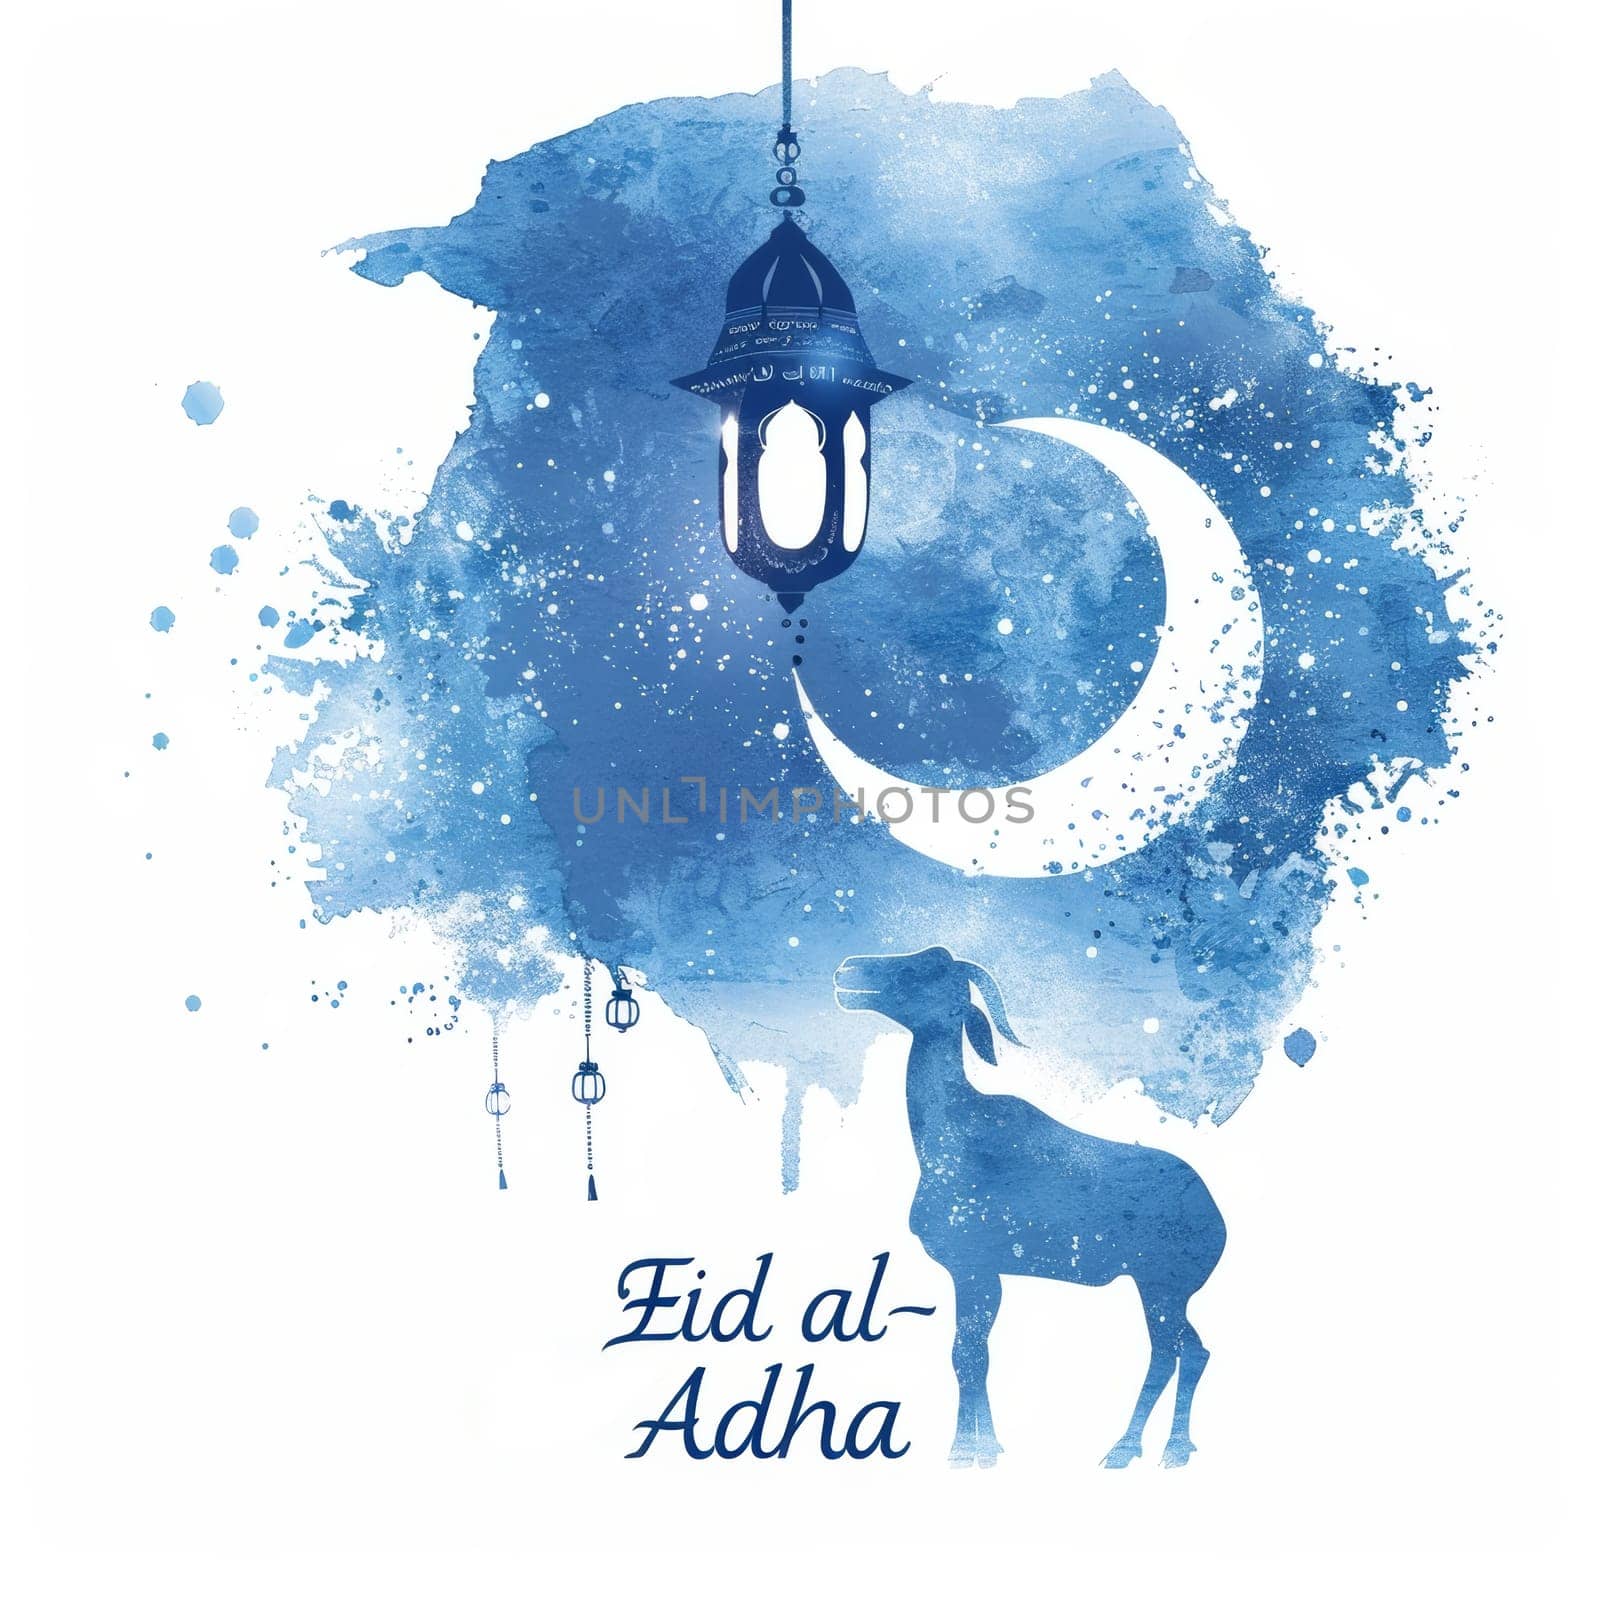 Watercolor-themed Eid al-Adha greeting featuring a goat silhouette with a hanging lantern against a crescent moon, in a peaceful night setting